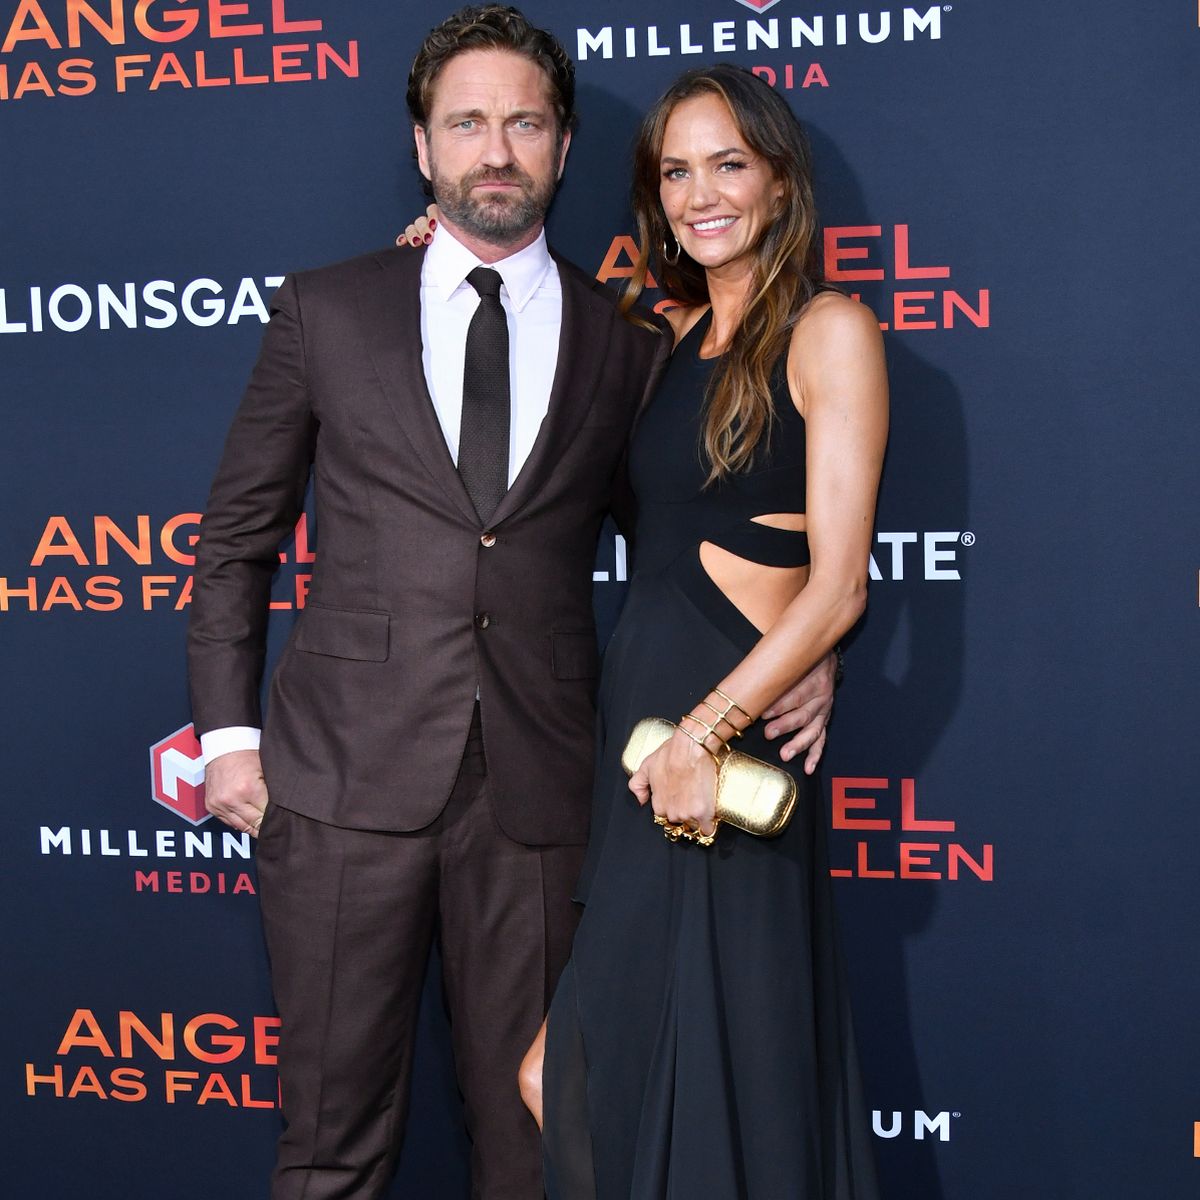 Gerard Butler wearing a black suit and holding his wife by the waist